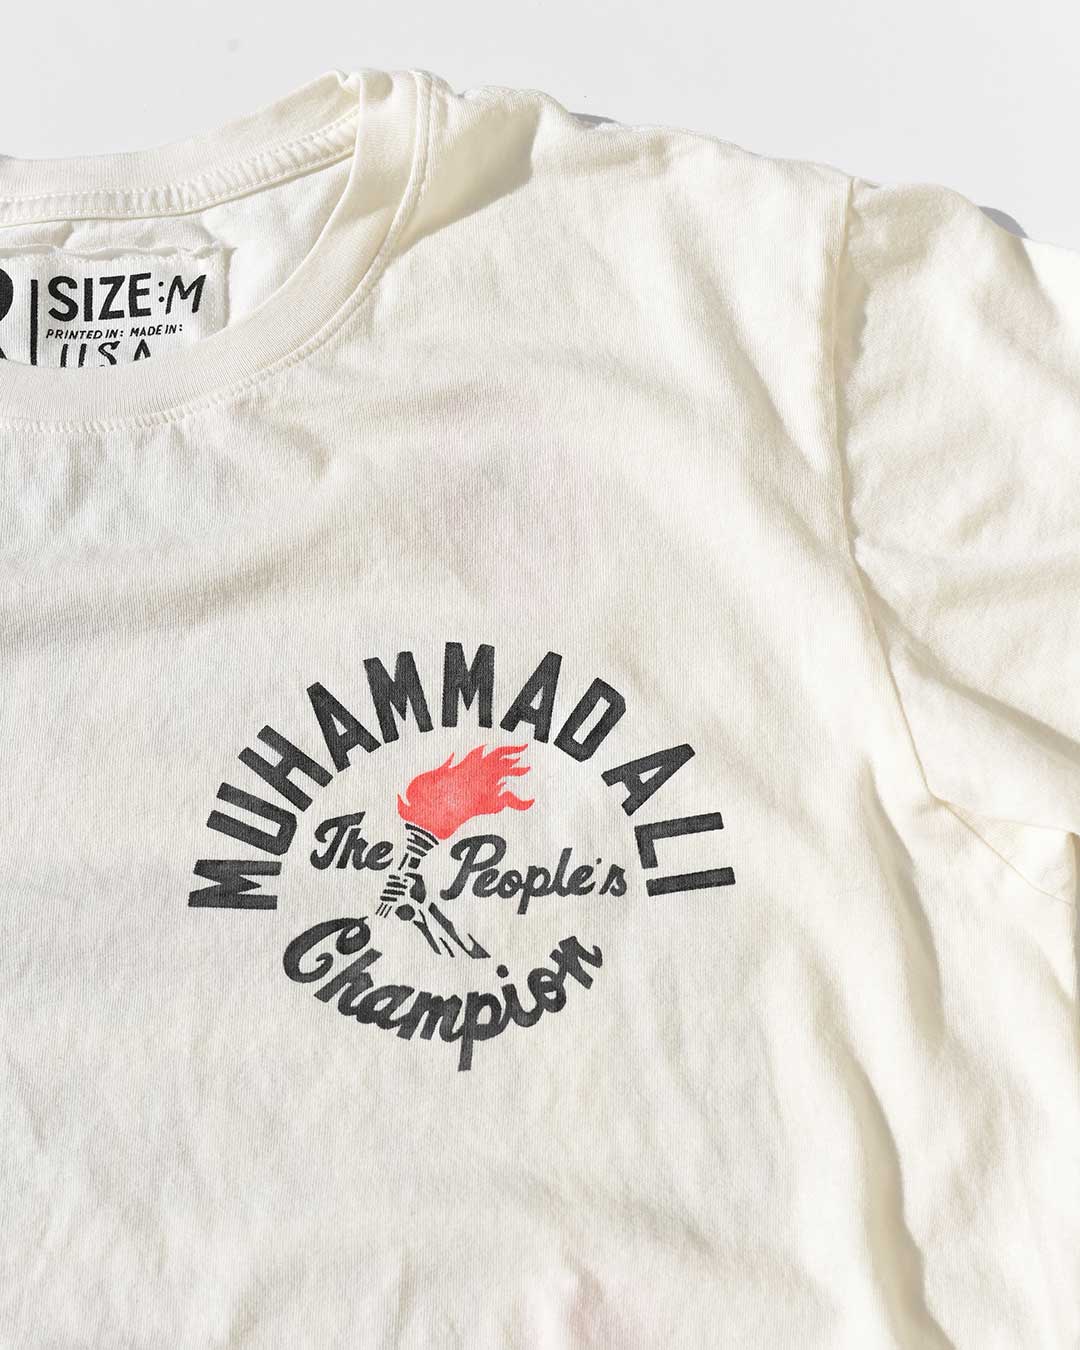 Ali Rumble &#39;The People&#39;s Champ&#39; White Tee - Roots of Fight Canada